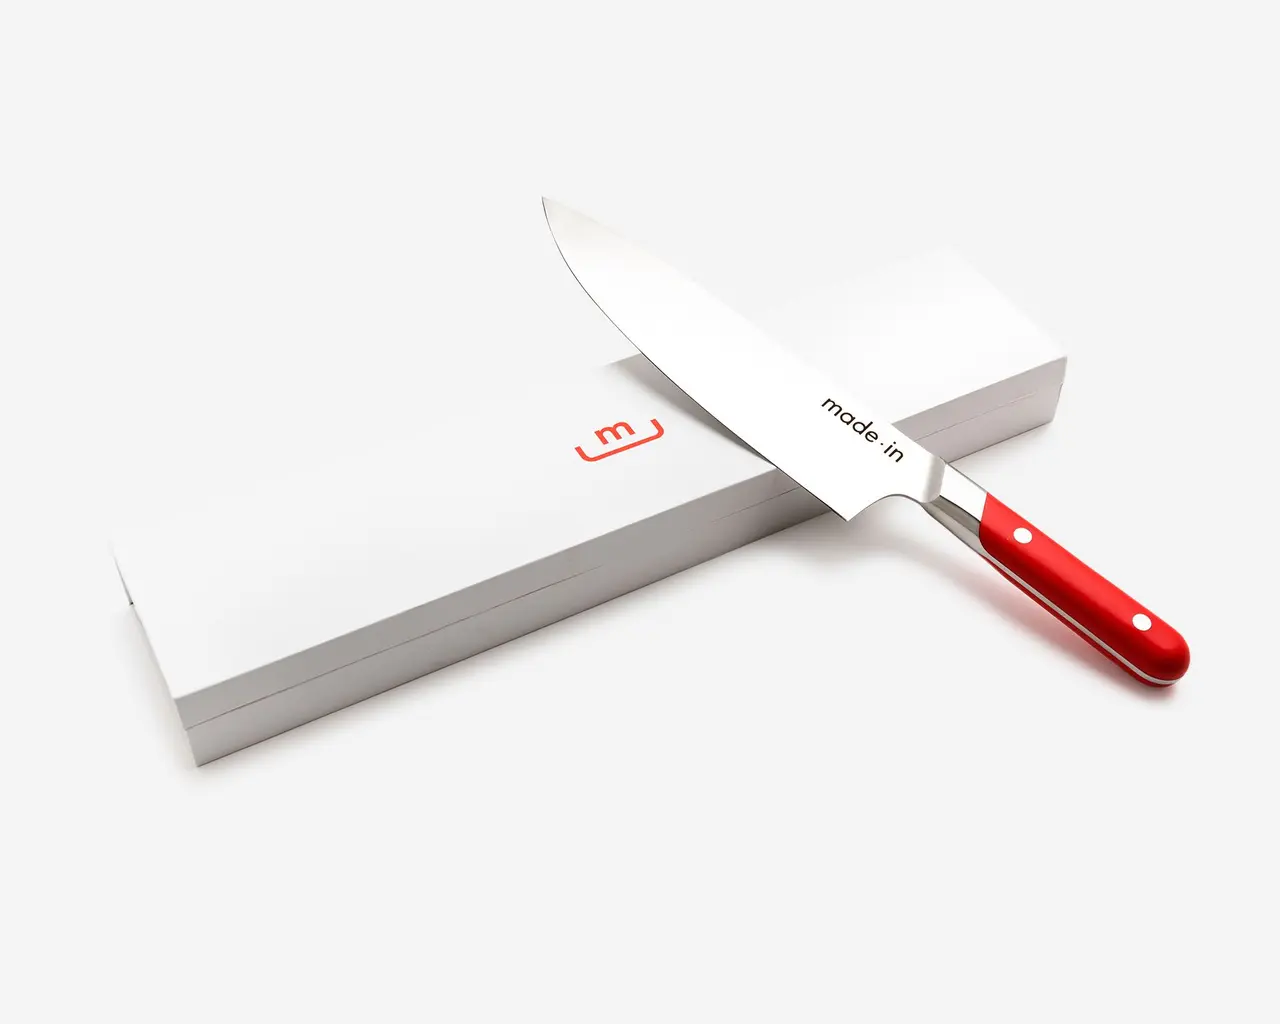 A chef's knife with a red handle lies partially out of its white packaging against a white background.